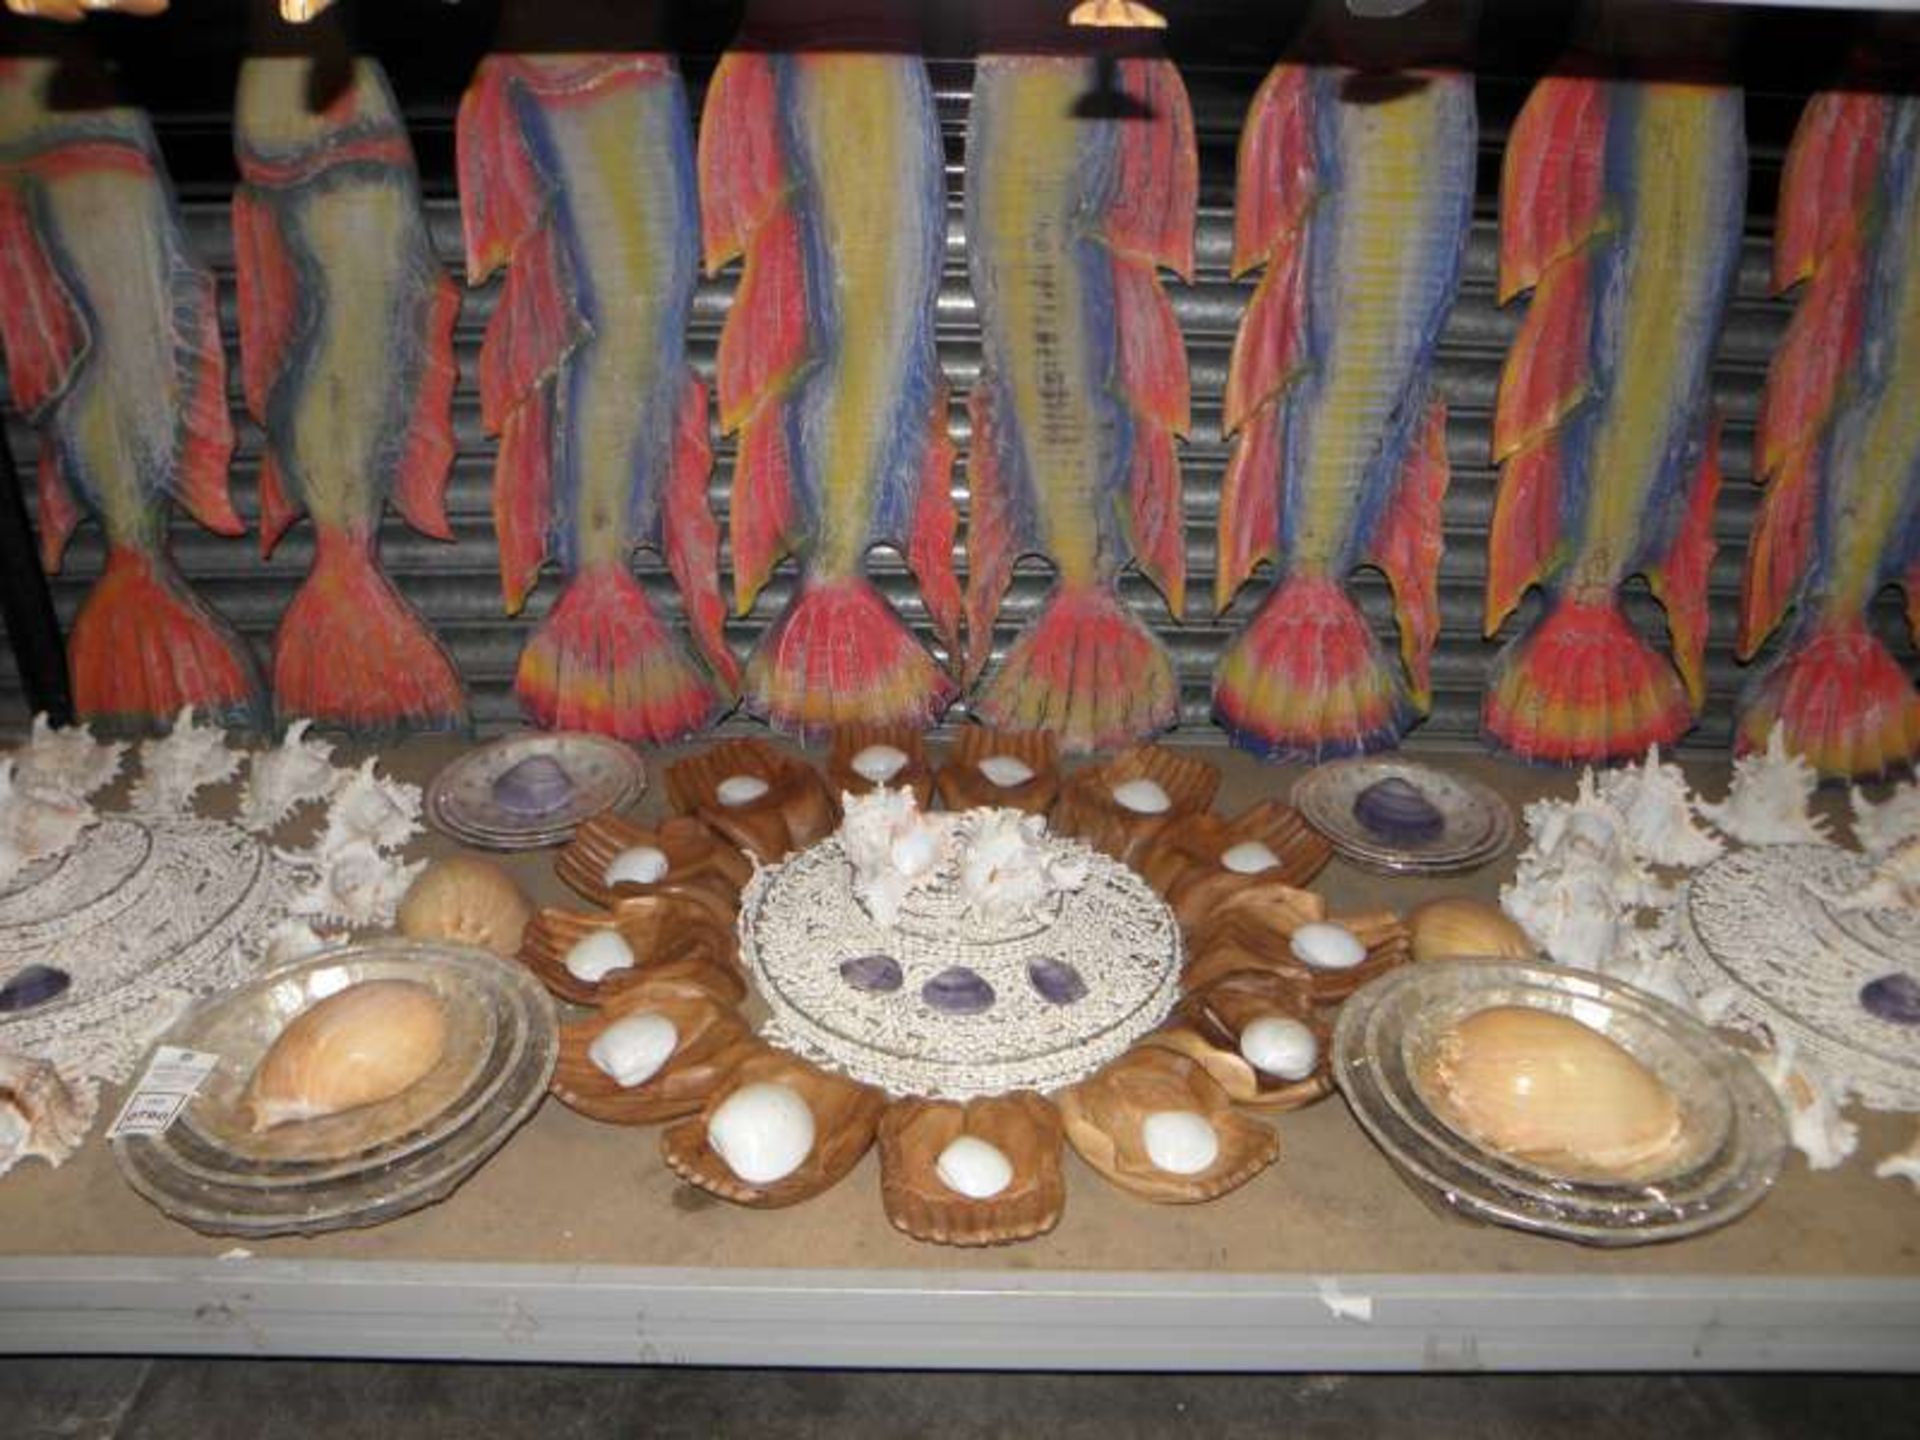 LOT CONTAINING SHELLS, WOODEN FISH, WOODEN CLASPING HANDS, BOWLS, SHELL LIGHT SHADES, ETC